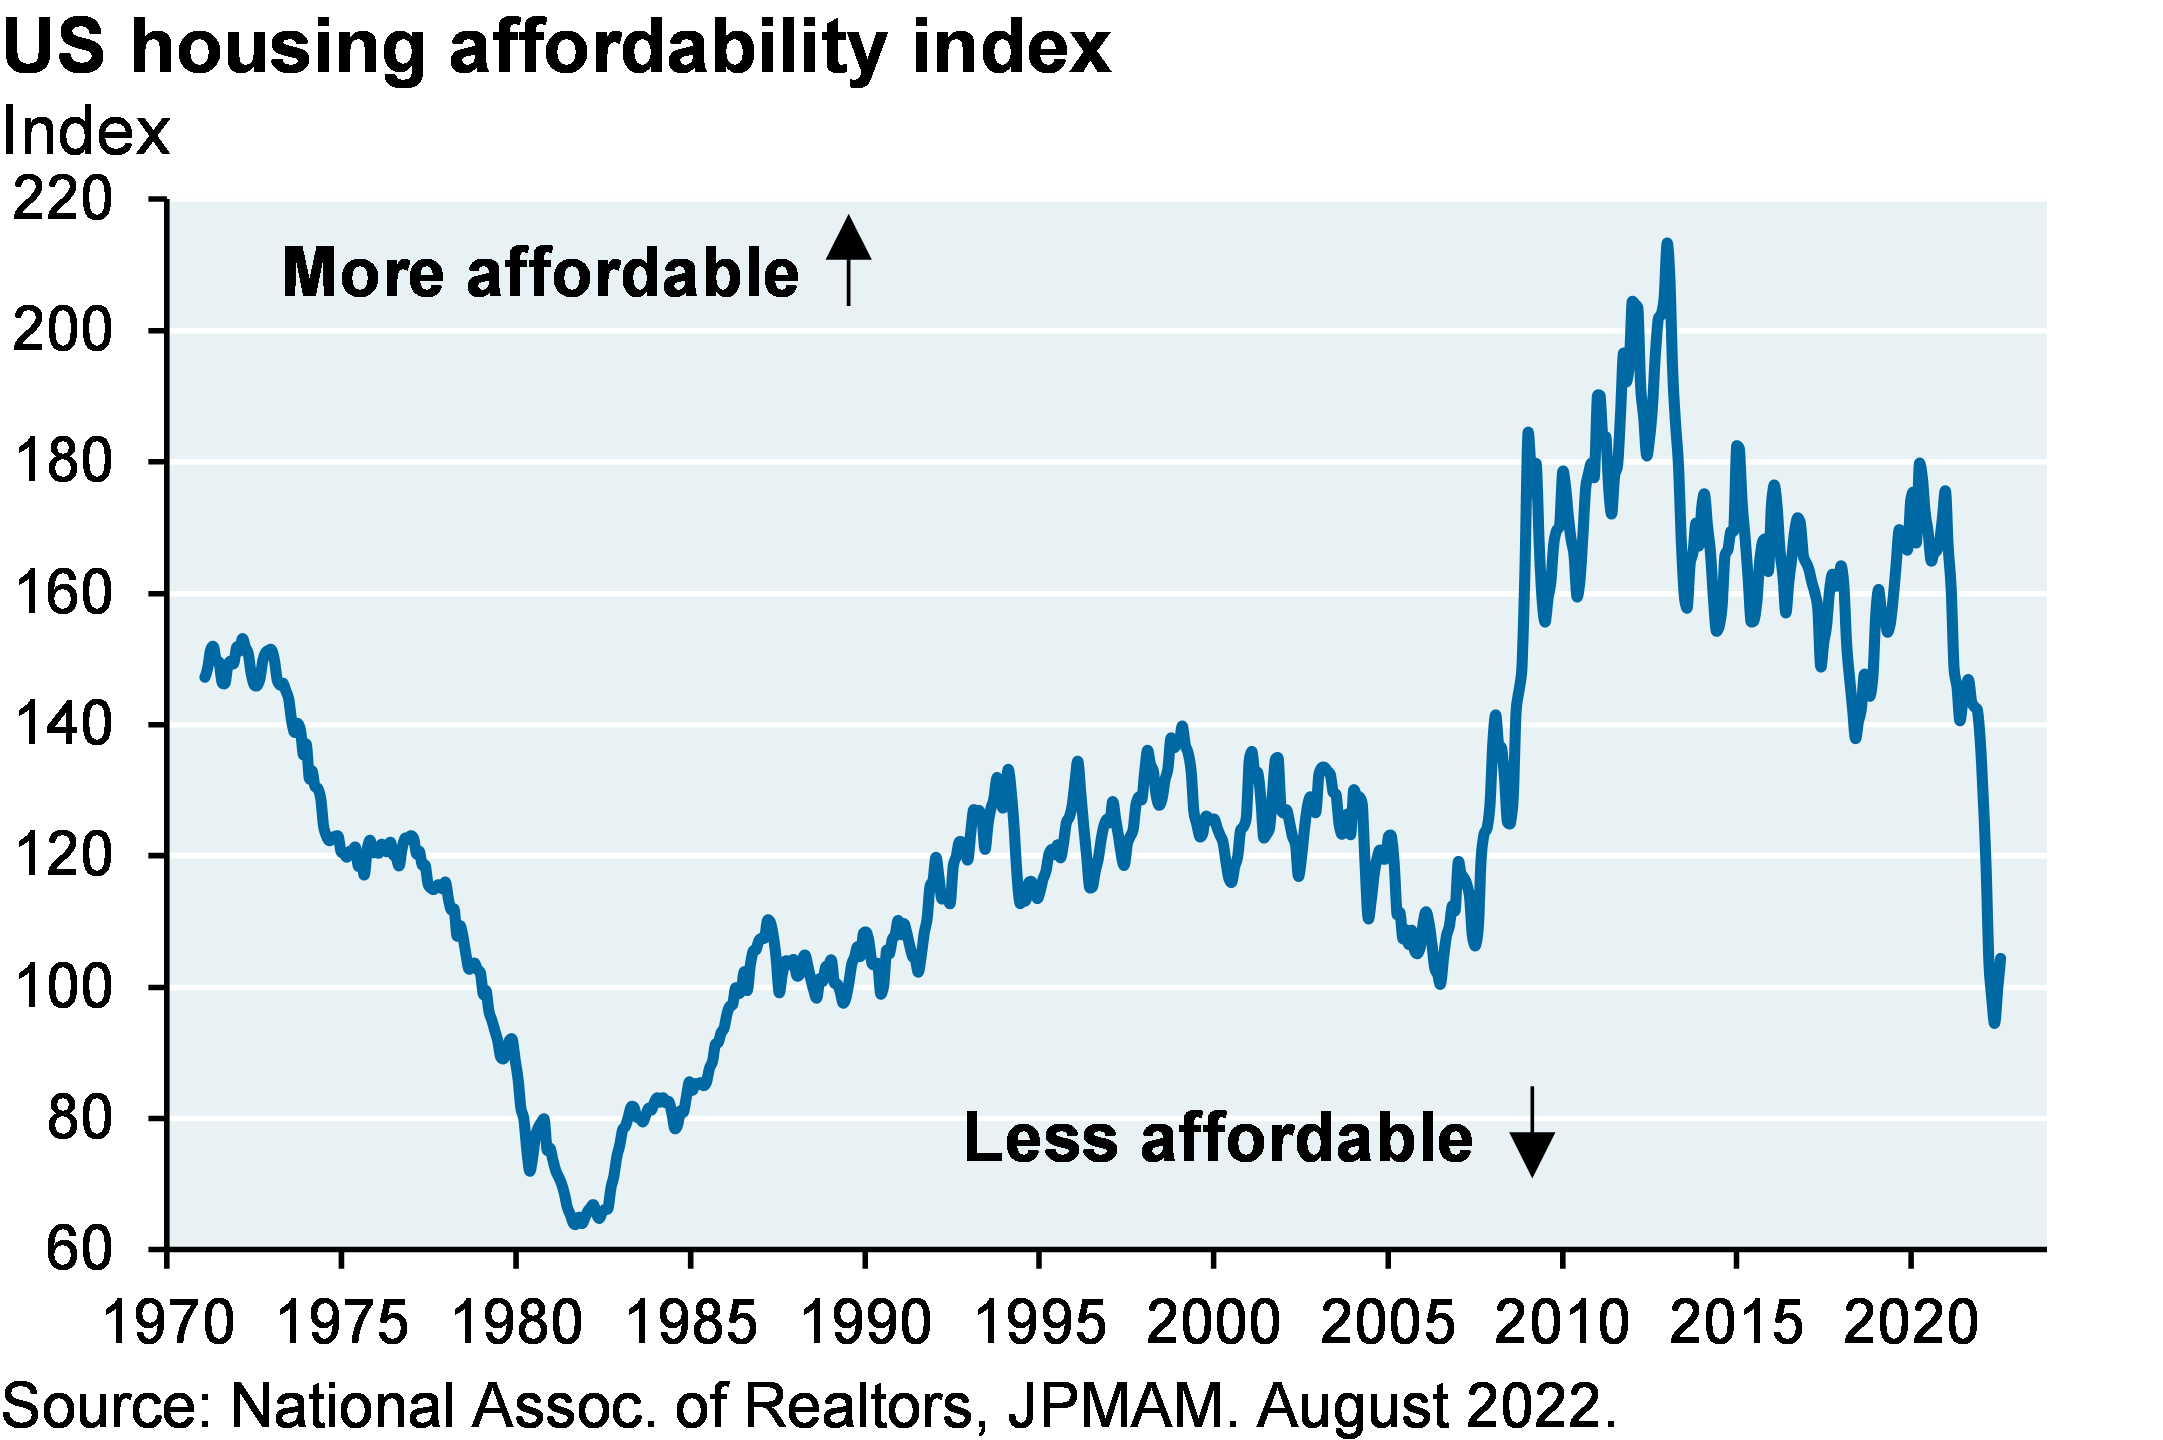 Line chart plots the US housing affordability index from 1970 to present. The index hovered around 160-180 for most of the 2010s, indicating greater housing affordability. Currently, the index has dipped to around 100, which is its lowest affordability since 2007. 